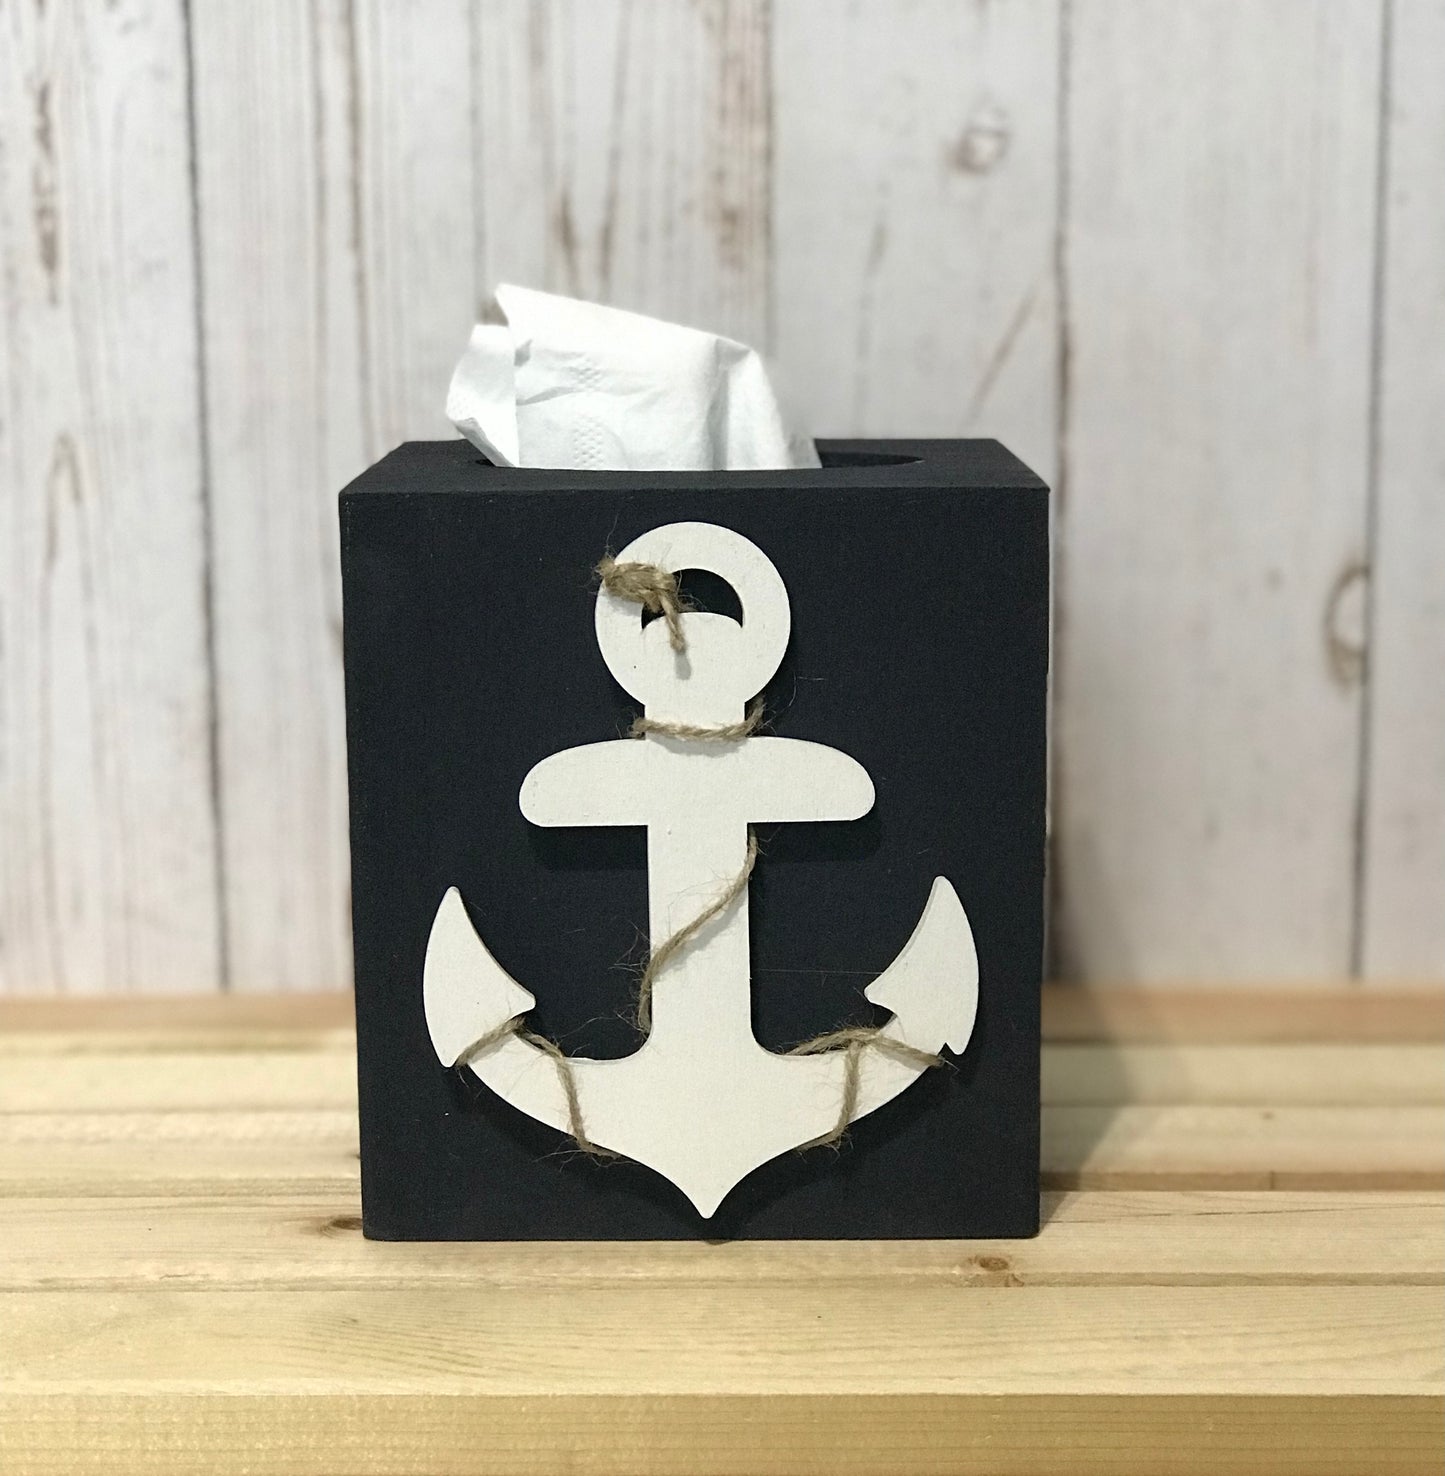 Square wood box Measures 5.75 inch x 5.25 inch Fits standard size facial tissue box. (not included) Hand painted in navy blue. Wooden anchor cutout is painted in white with jute rope running through it on one side only. 